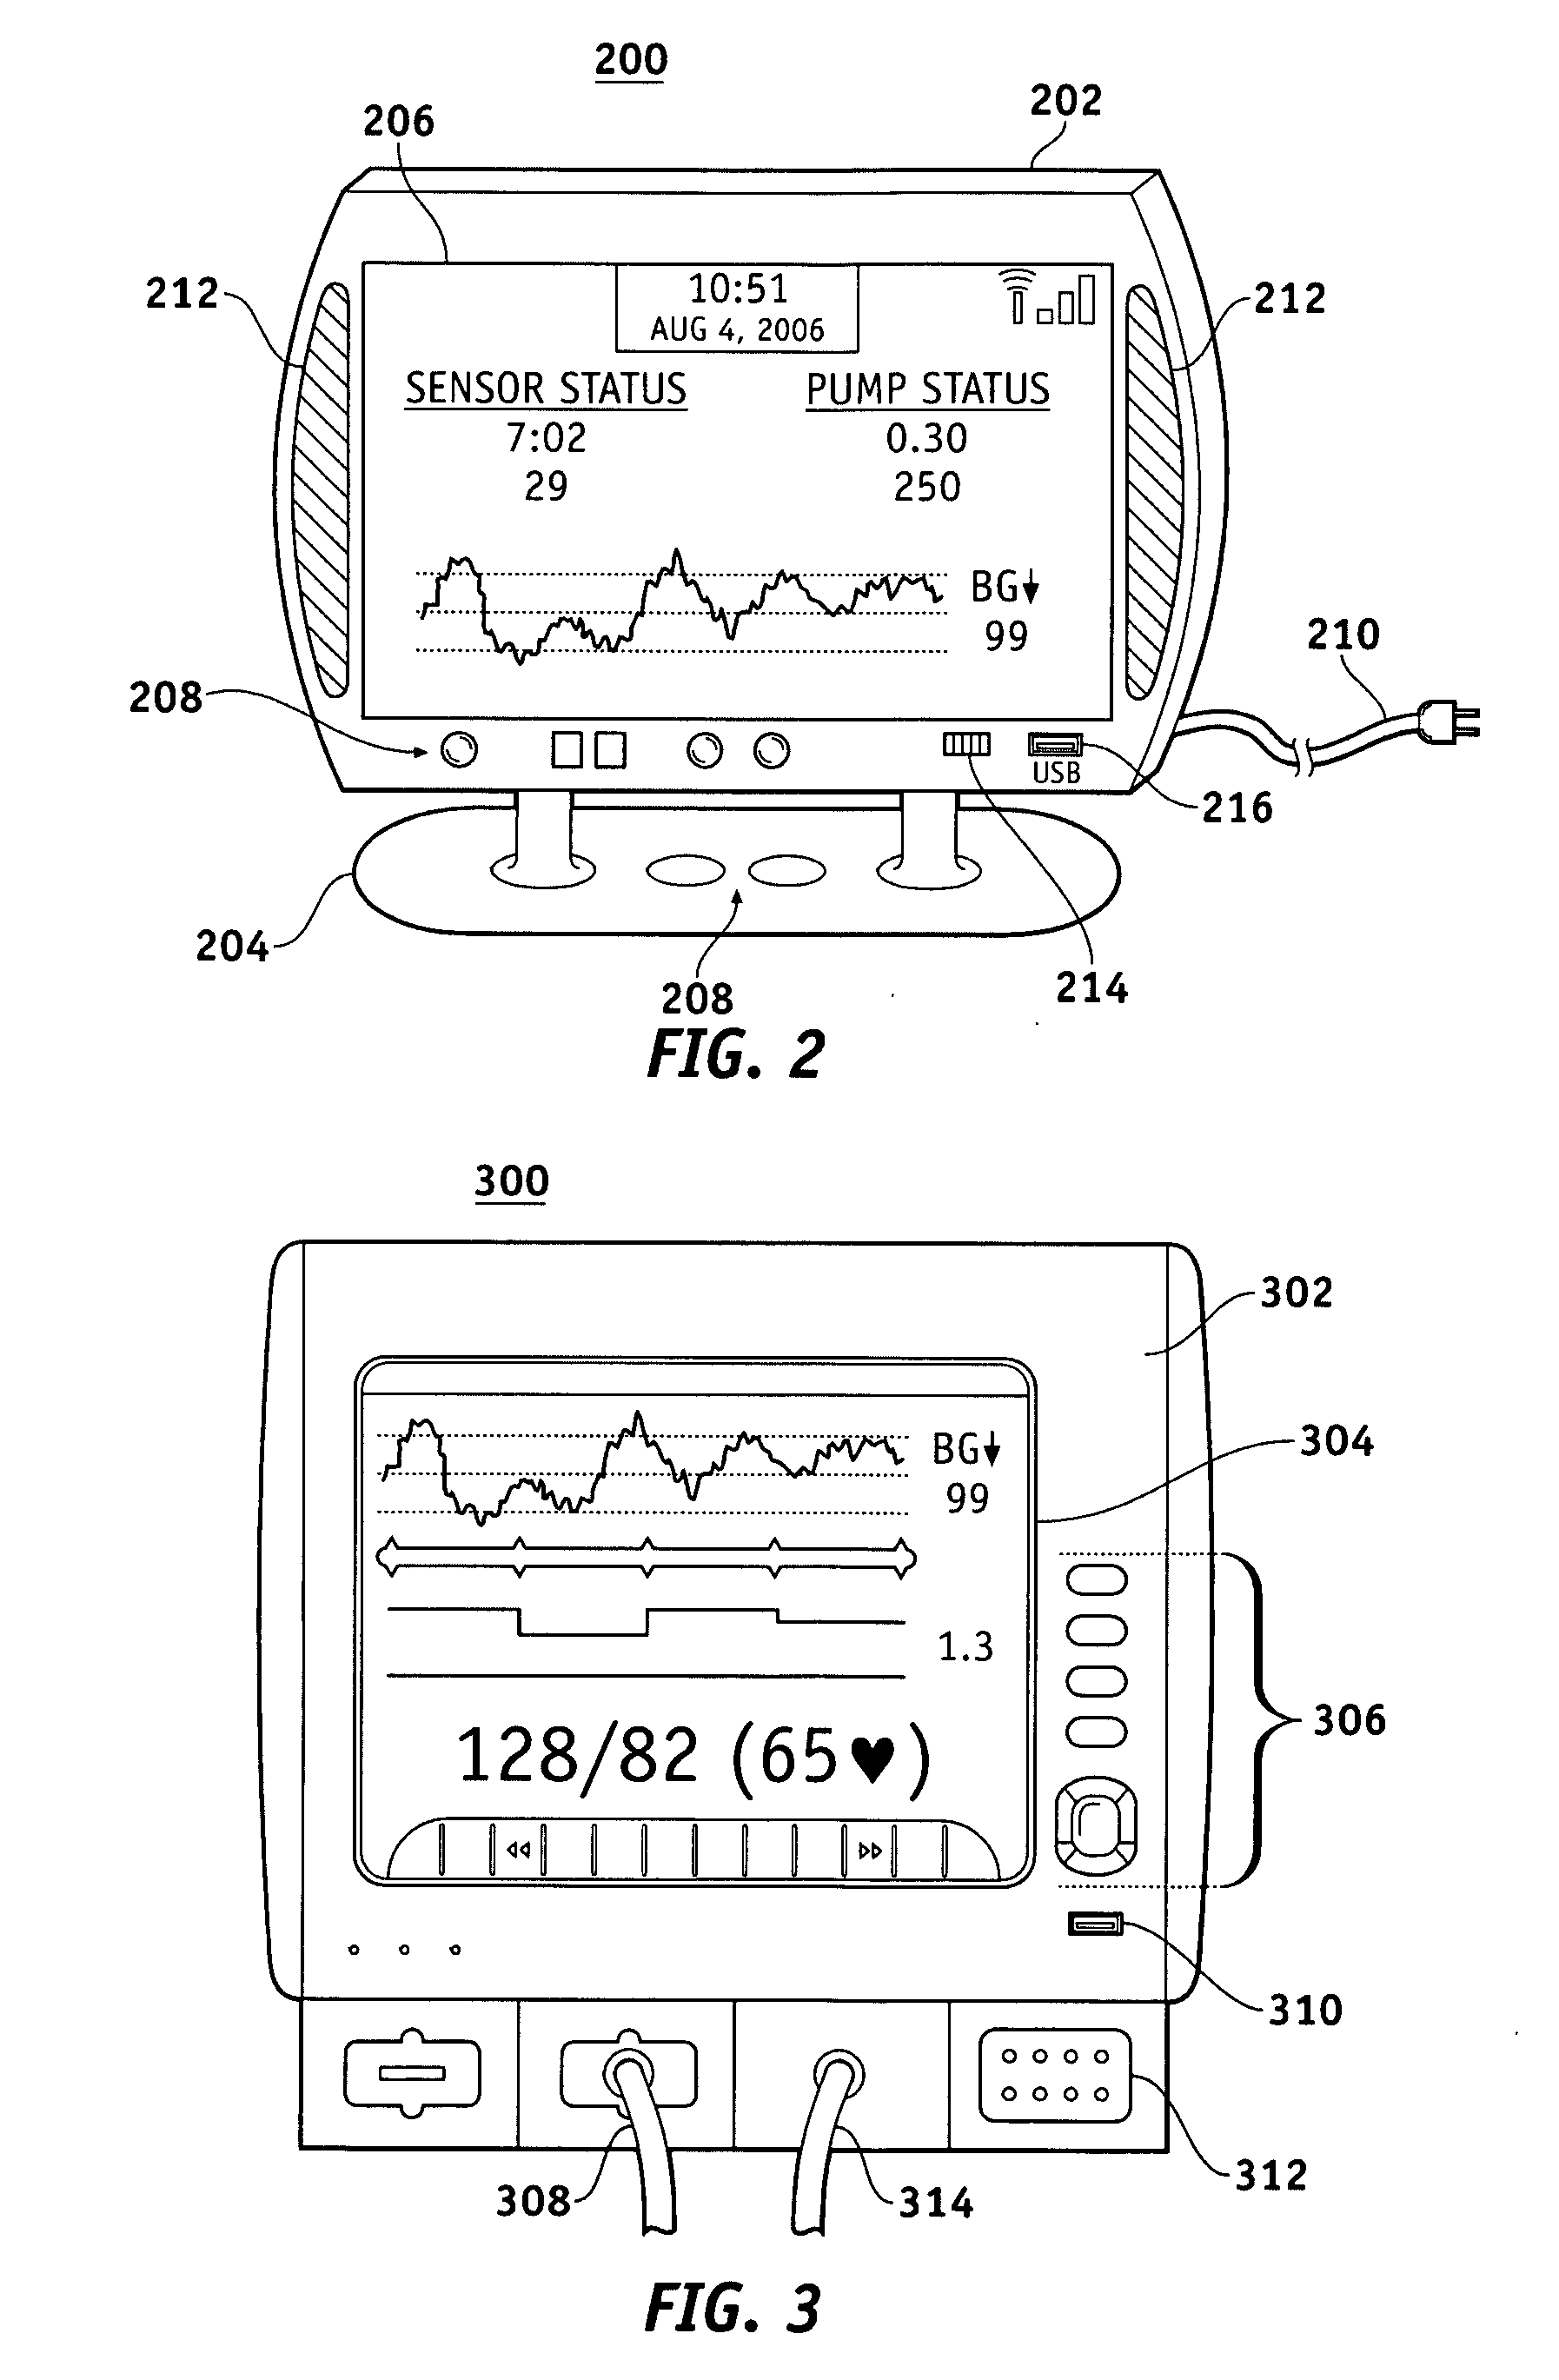 Data communication in networked fluid infusion systems